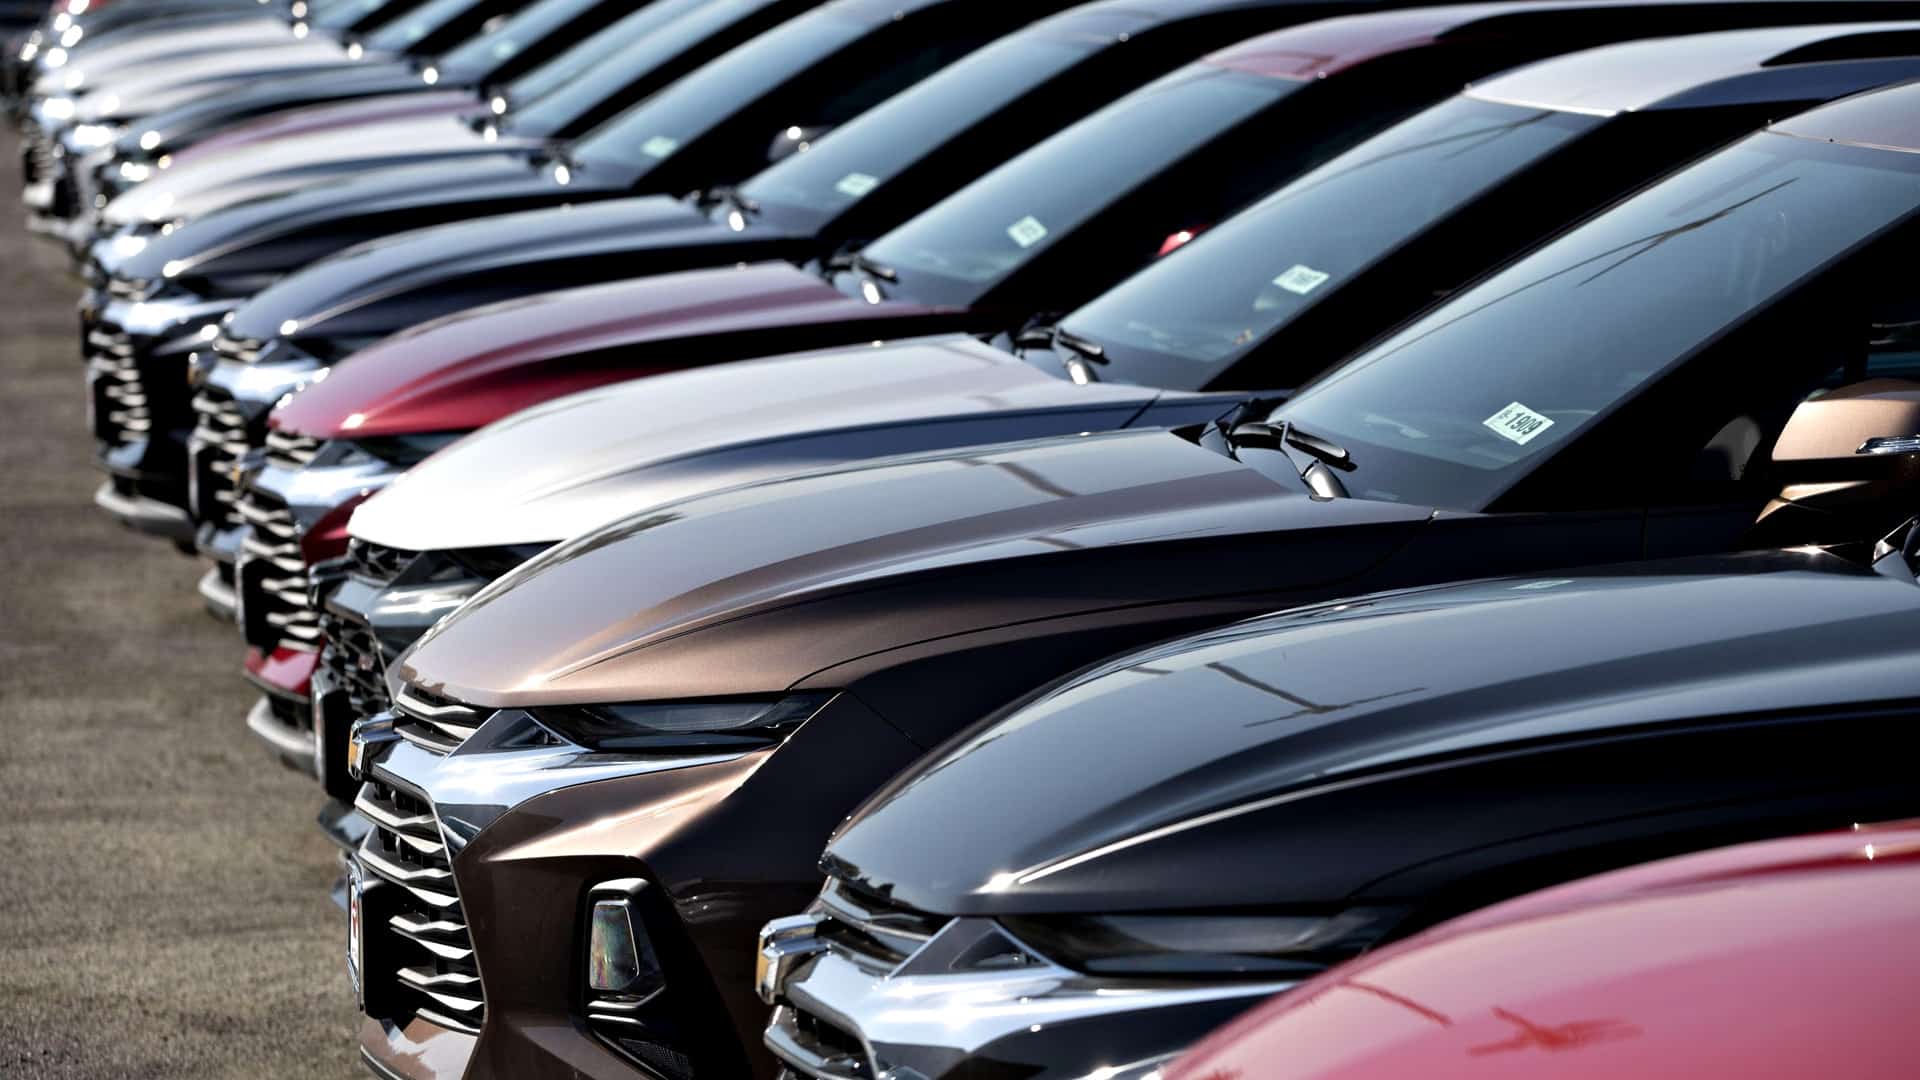 Automobile retail sales witness 10 per cent growth in July: FADA